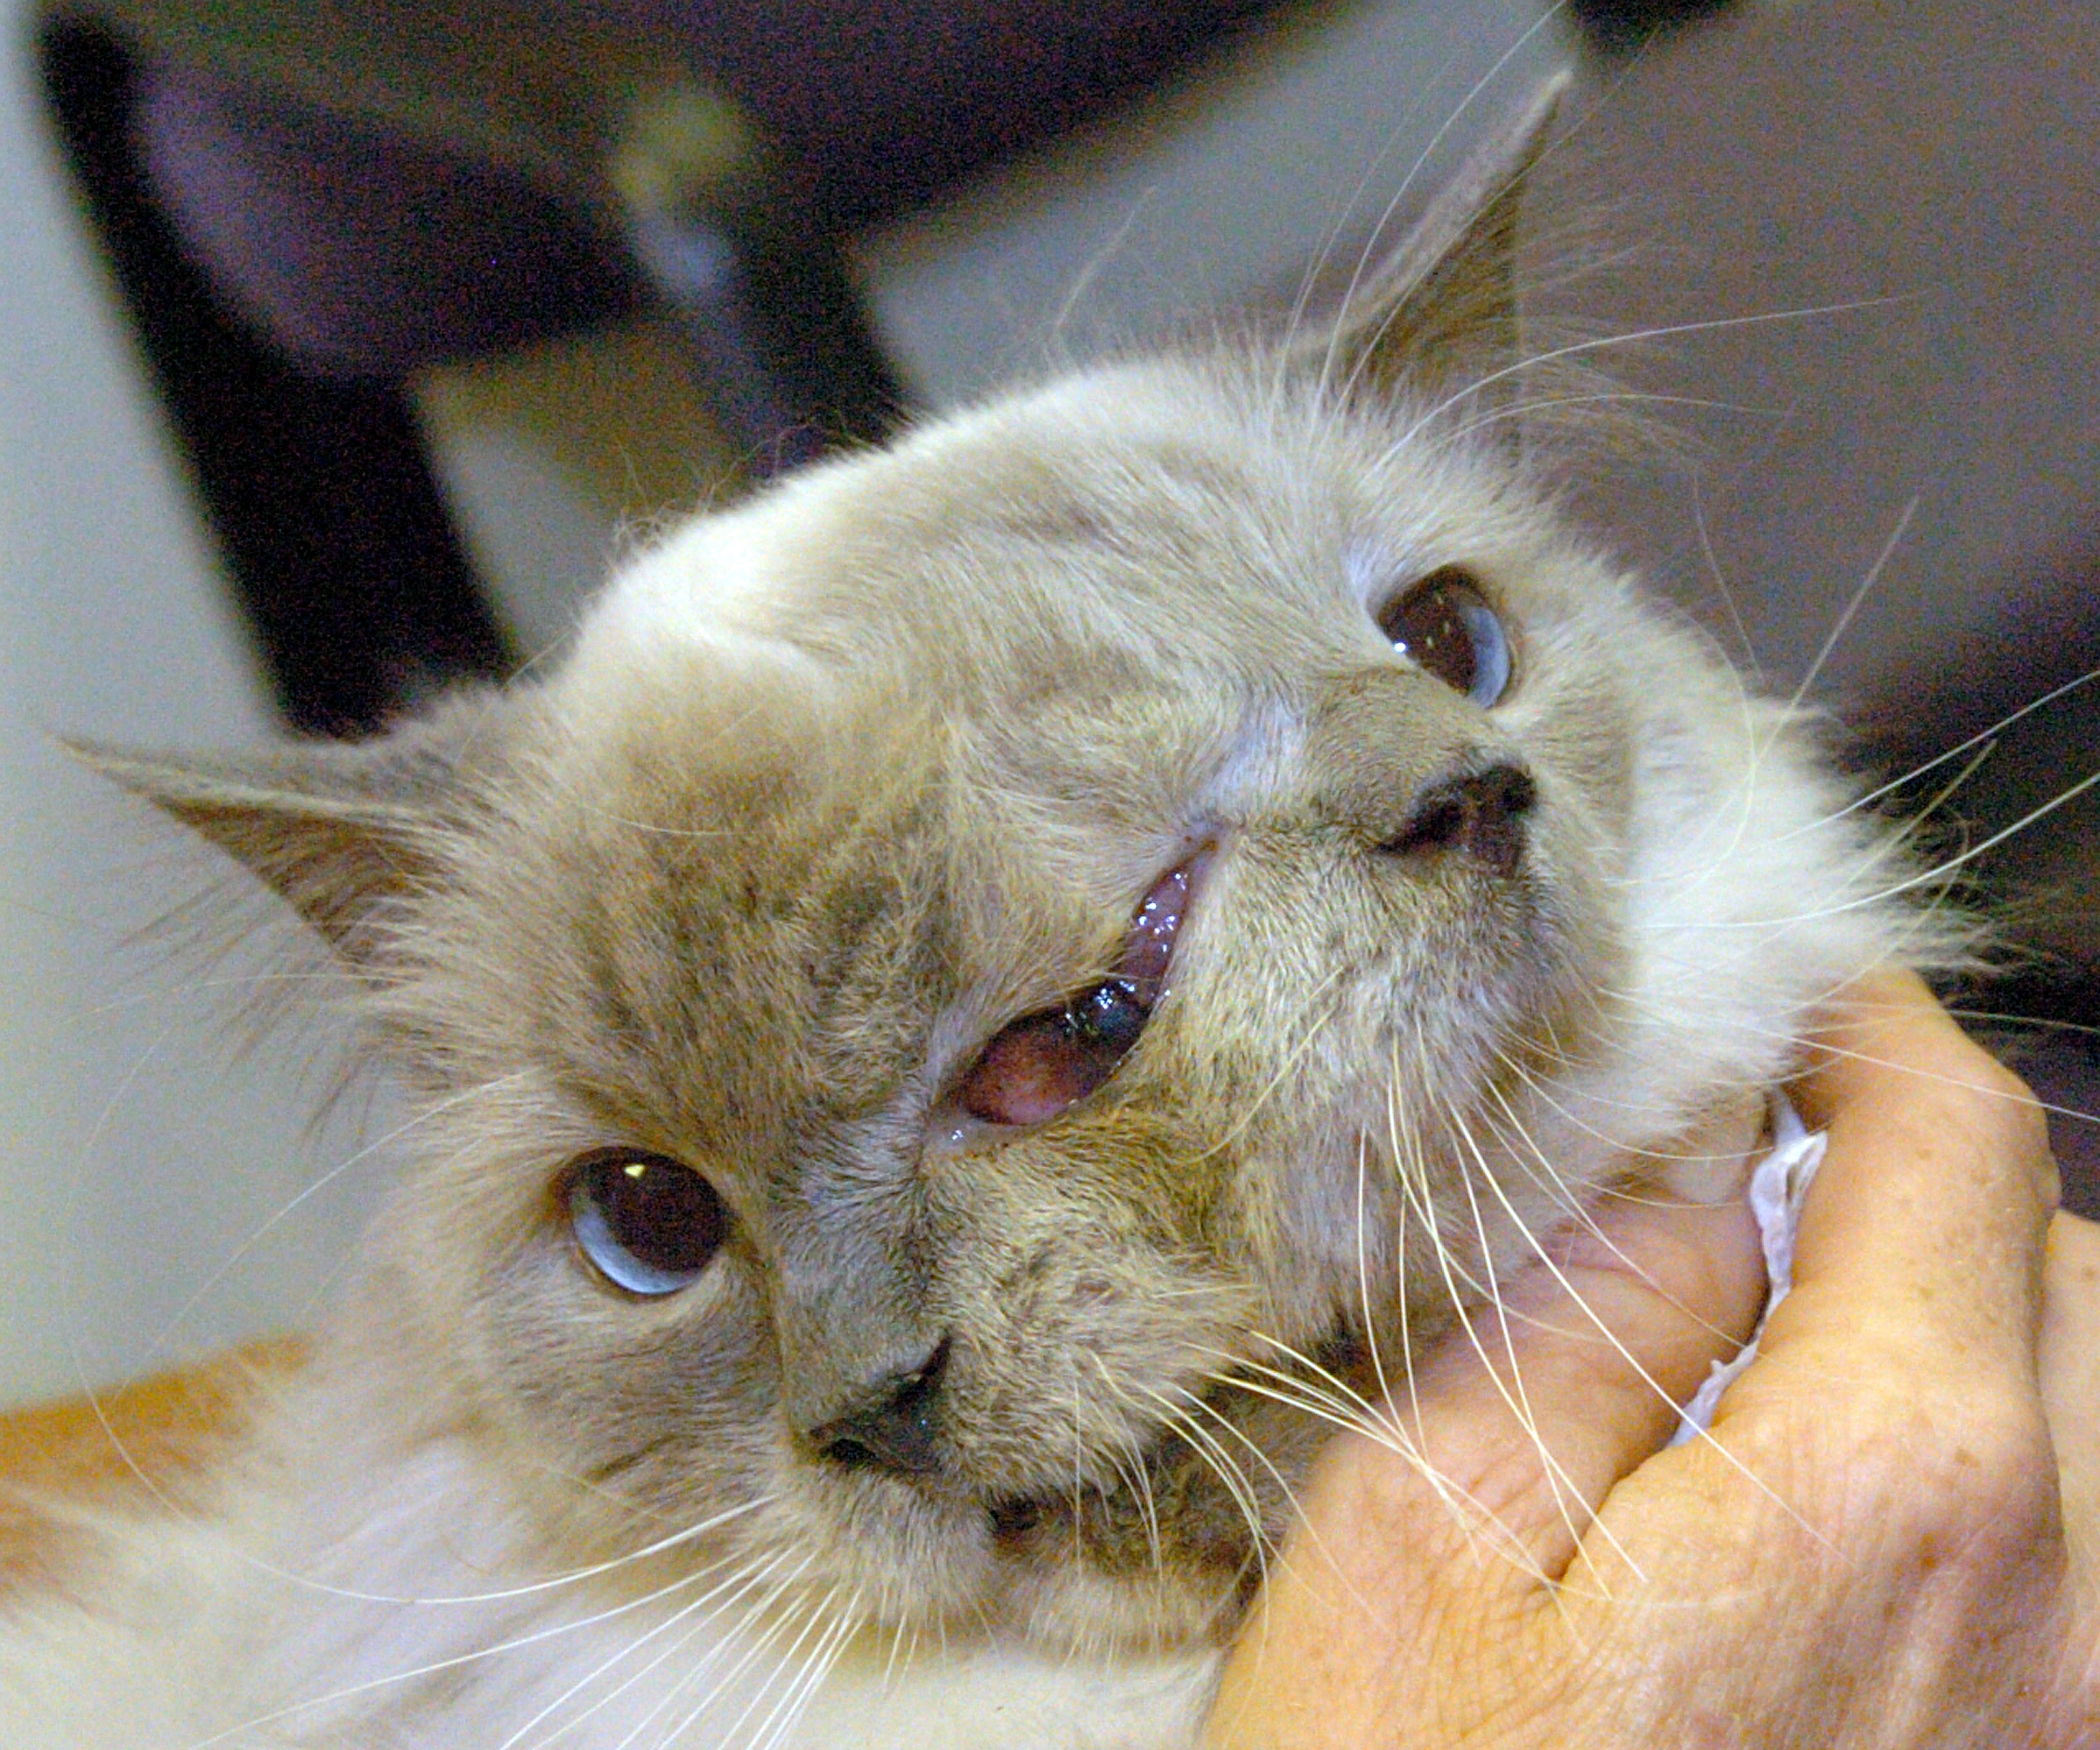 PHOTO: This undated photo shows the two faced cat named Frank and Louie.